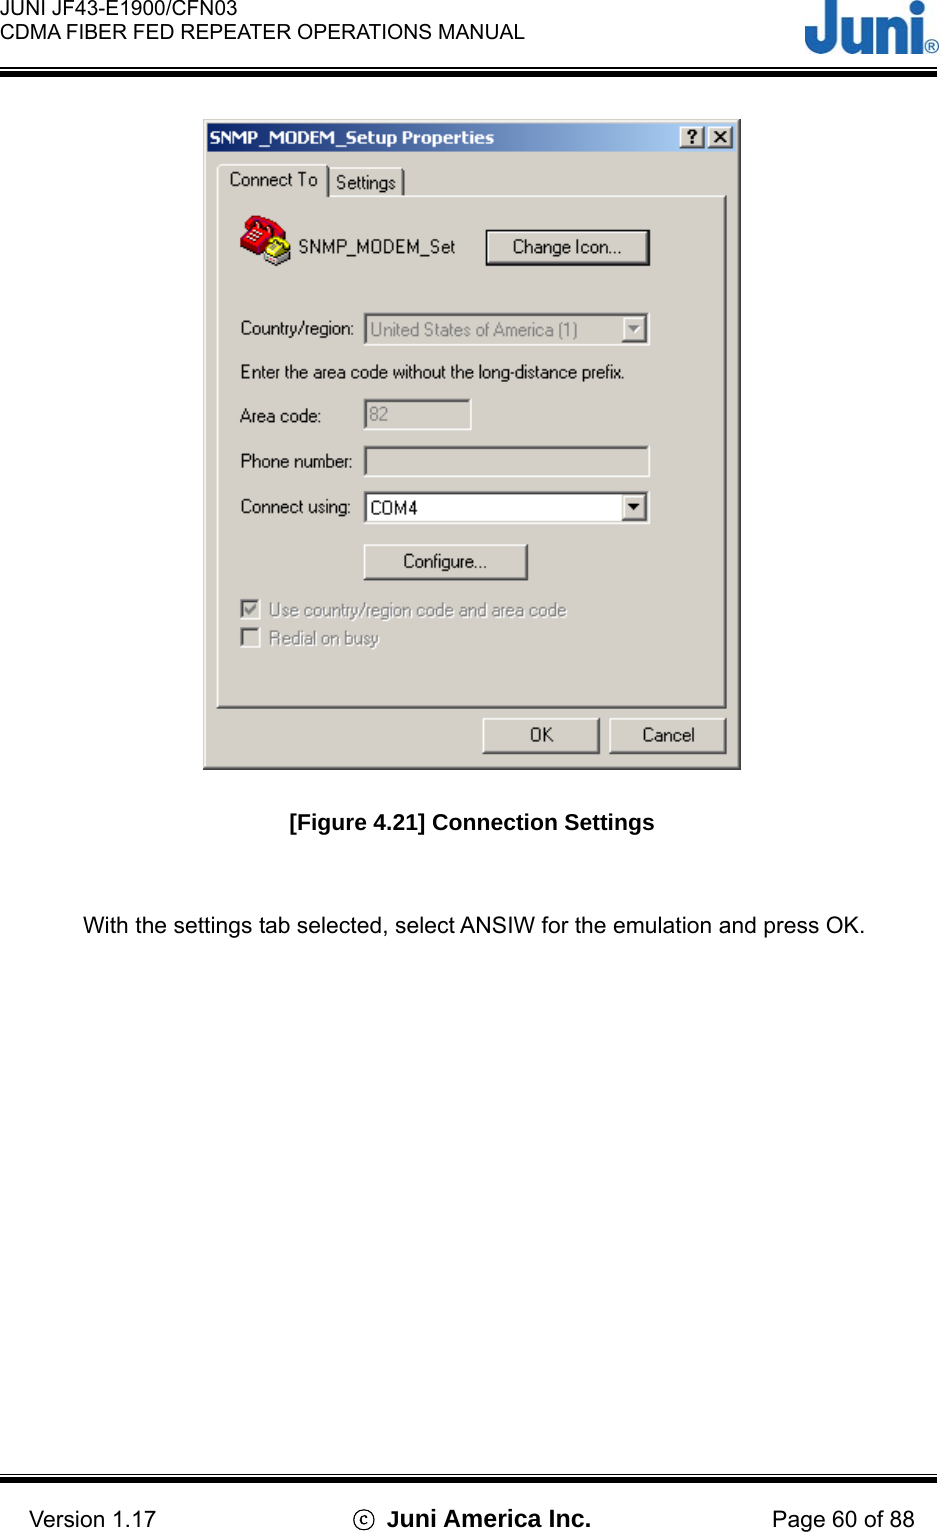  JUNI JF43-E1900/CFN03 CDMA FIBER FED REPEATER OPERATIONS MANUAL                                    Version 1.17  ⓒ Juni America Inc. Page 60 of 88  [Figure 4.21] Connection Settings  With the settings tab selected, select ANSIW for the emulation and press OK. 